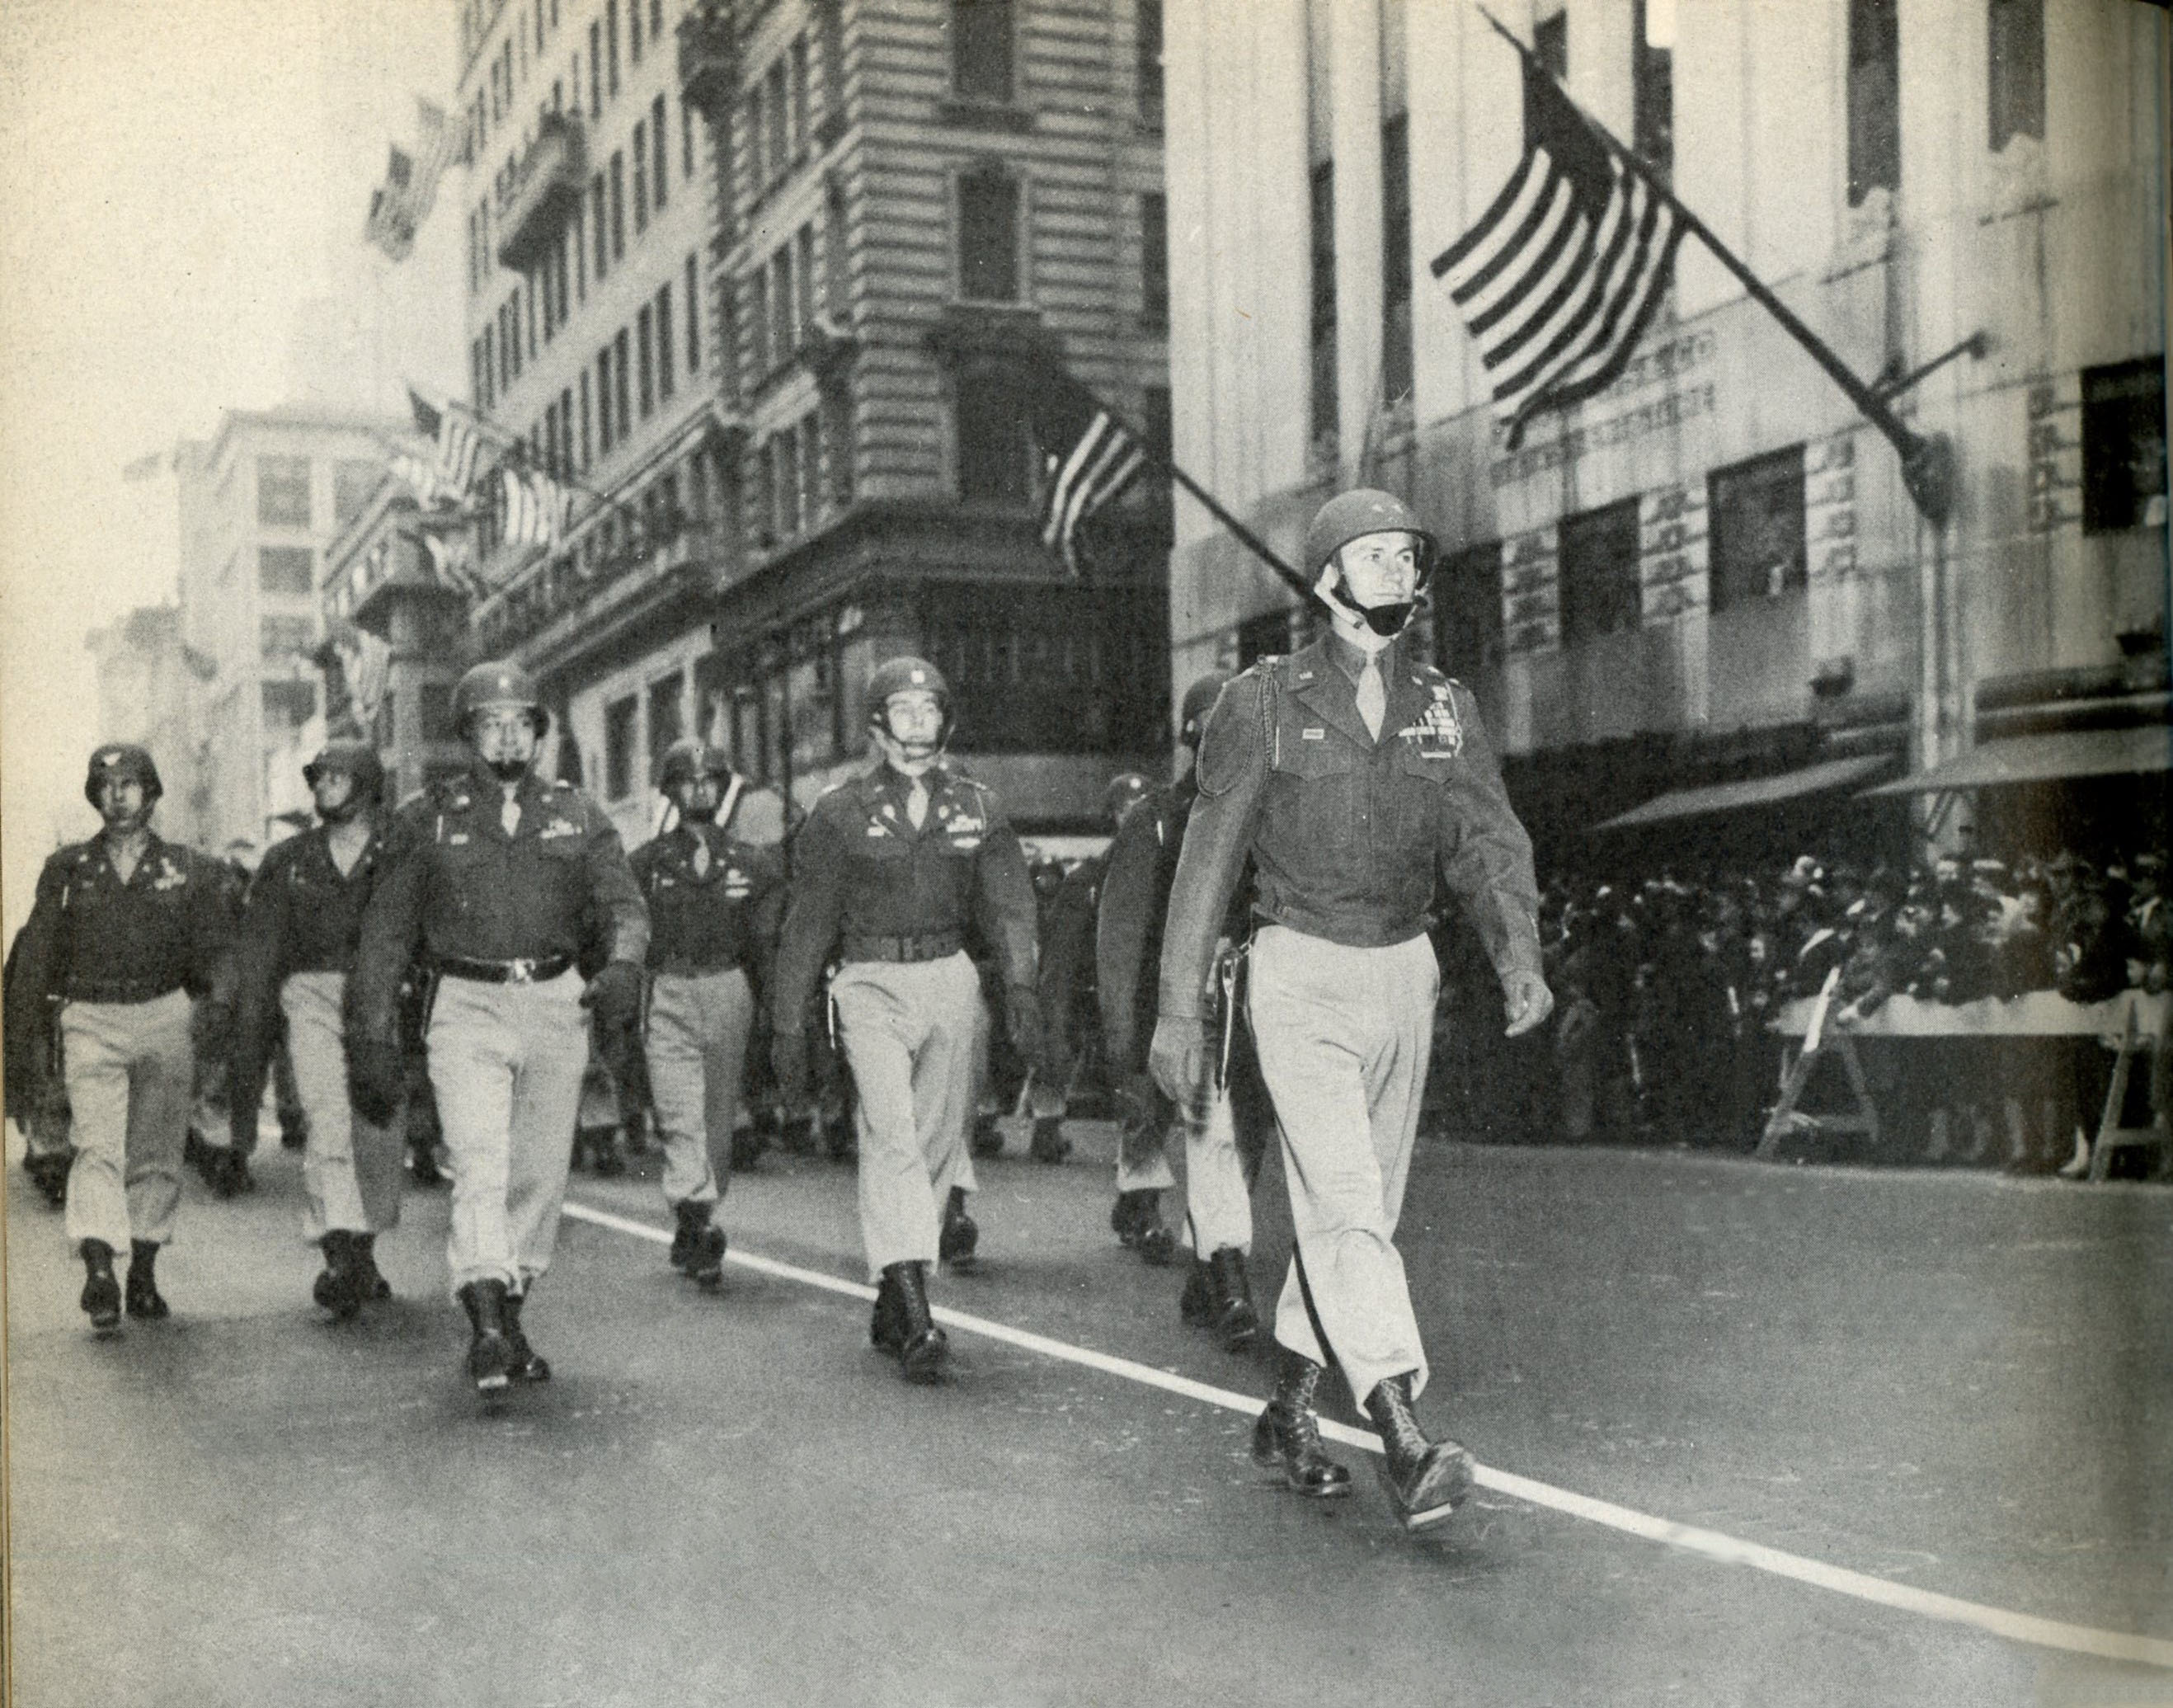 General Gavin leads the 1946 Victory Parade down 5th Avenue in NYC.